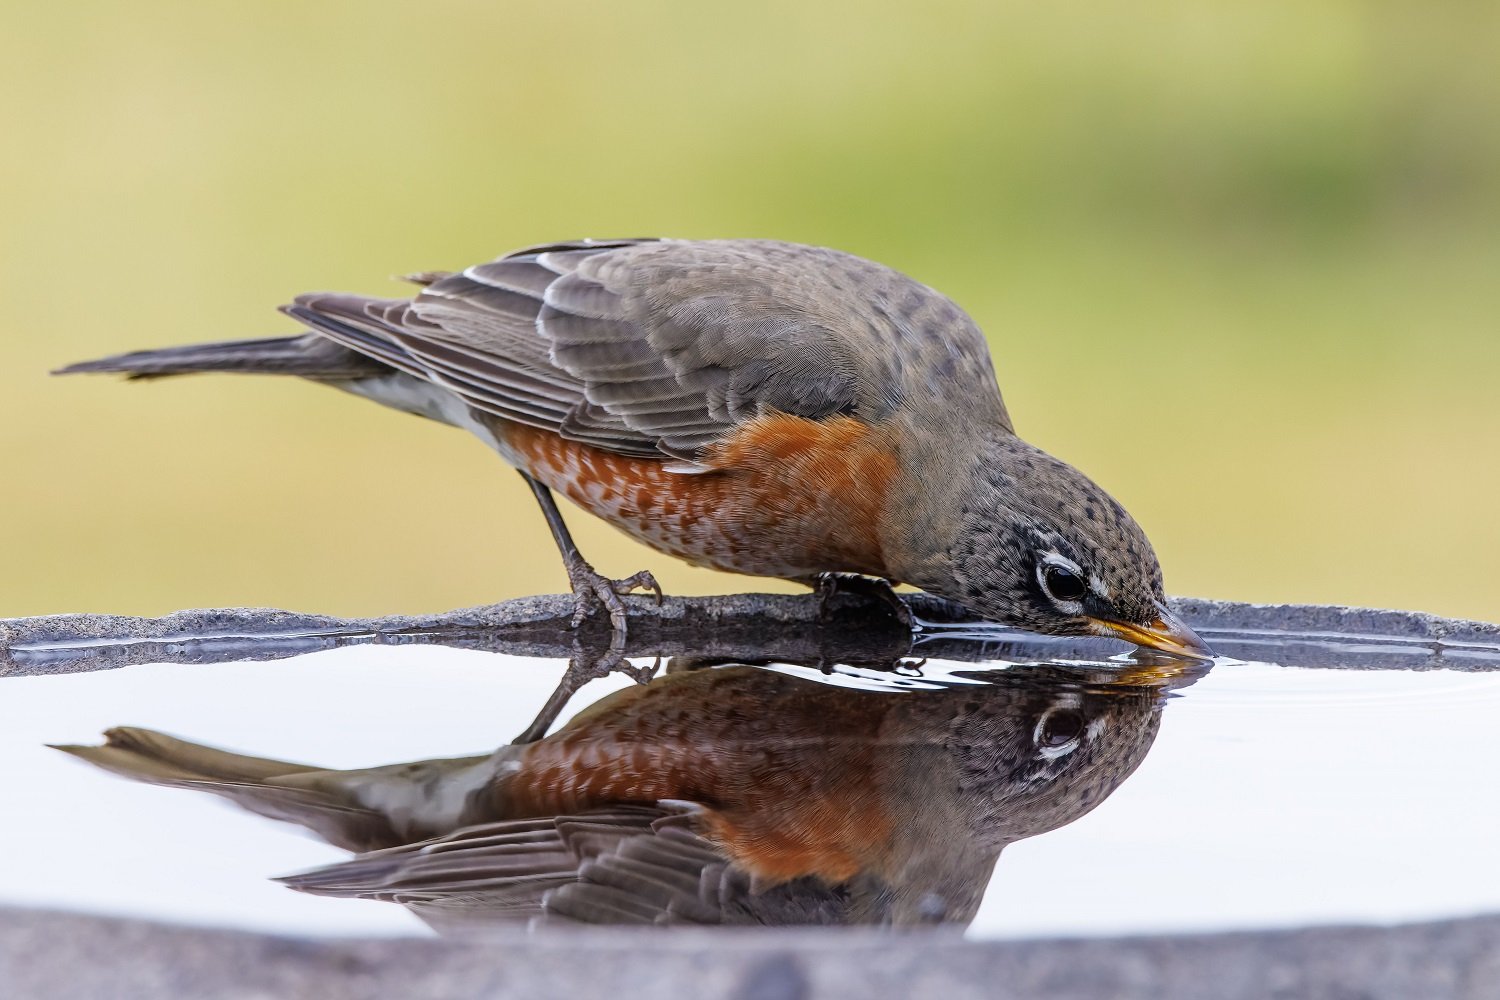 Tips for Making Your Yard More Bird-Friendly